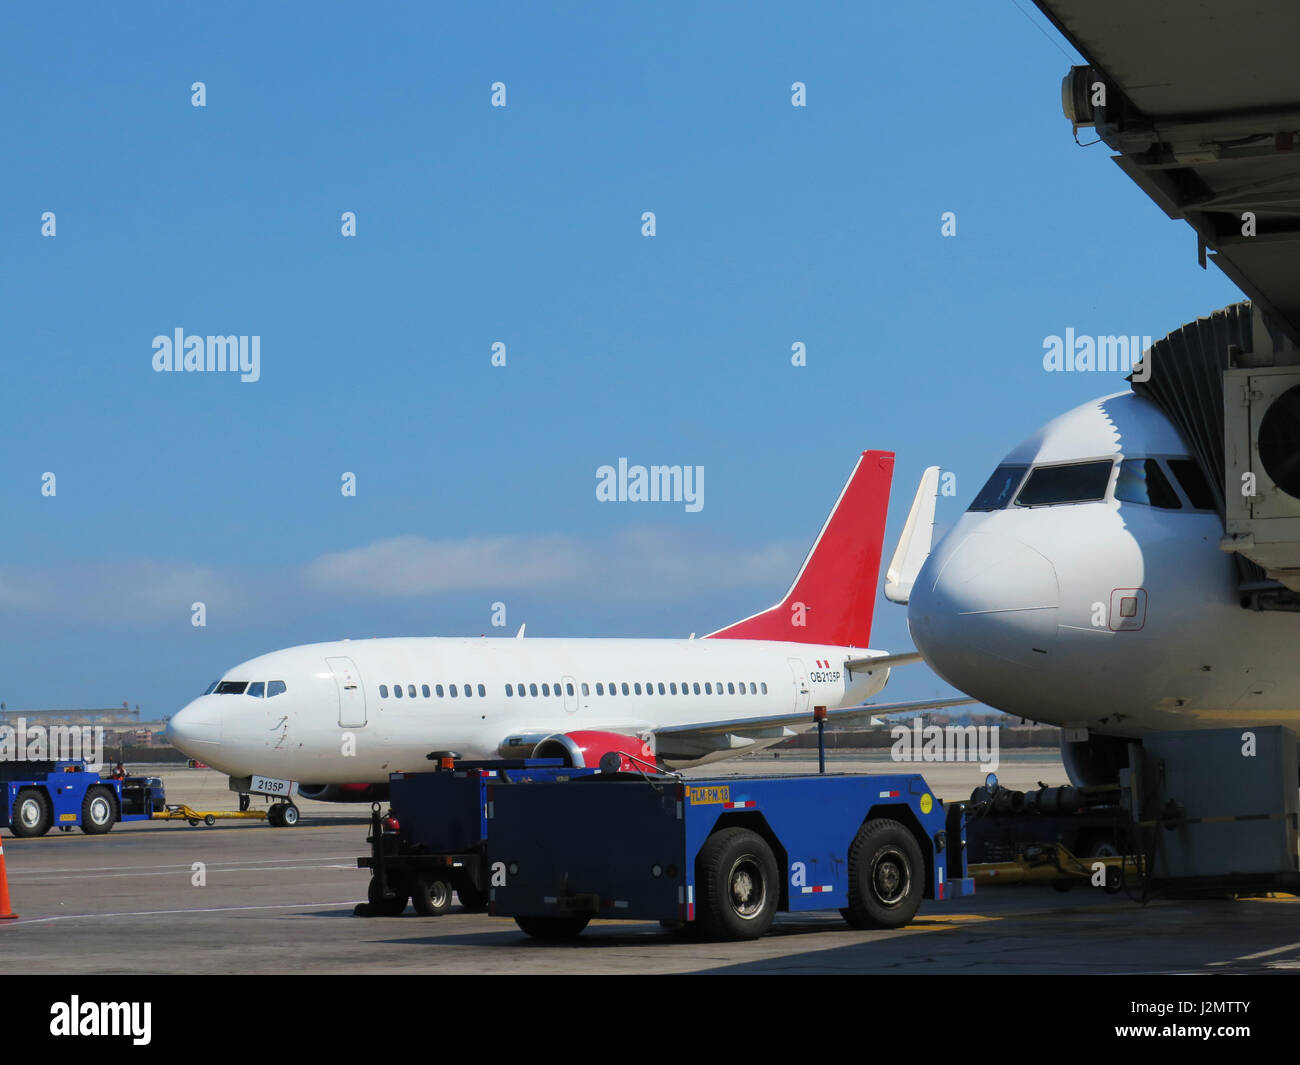 Aerobridge in plane parked in the airport waiting for passengers Stock Photo